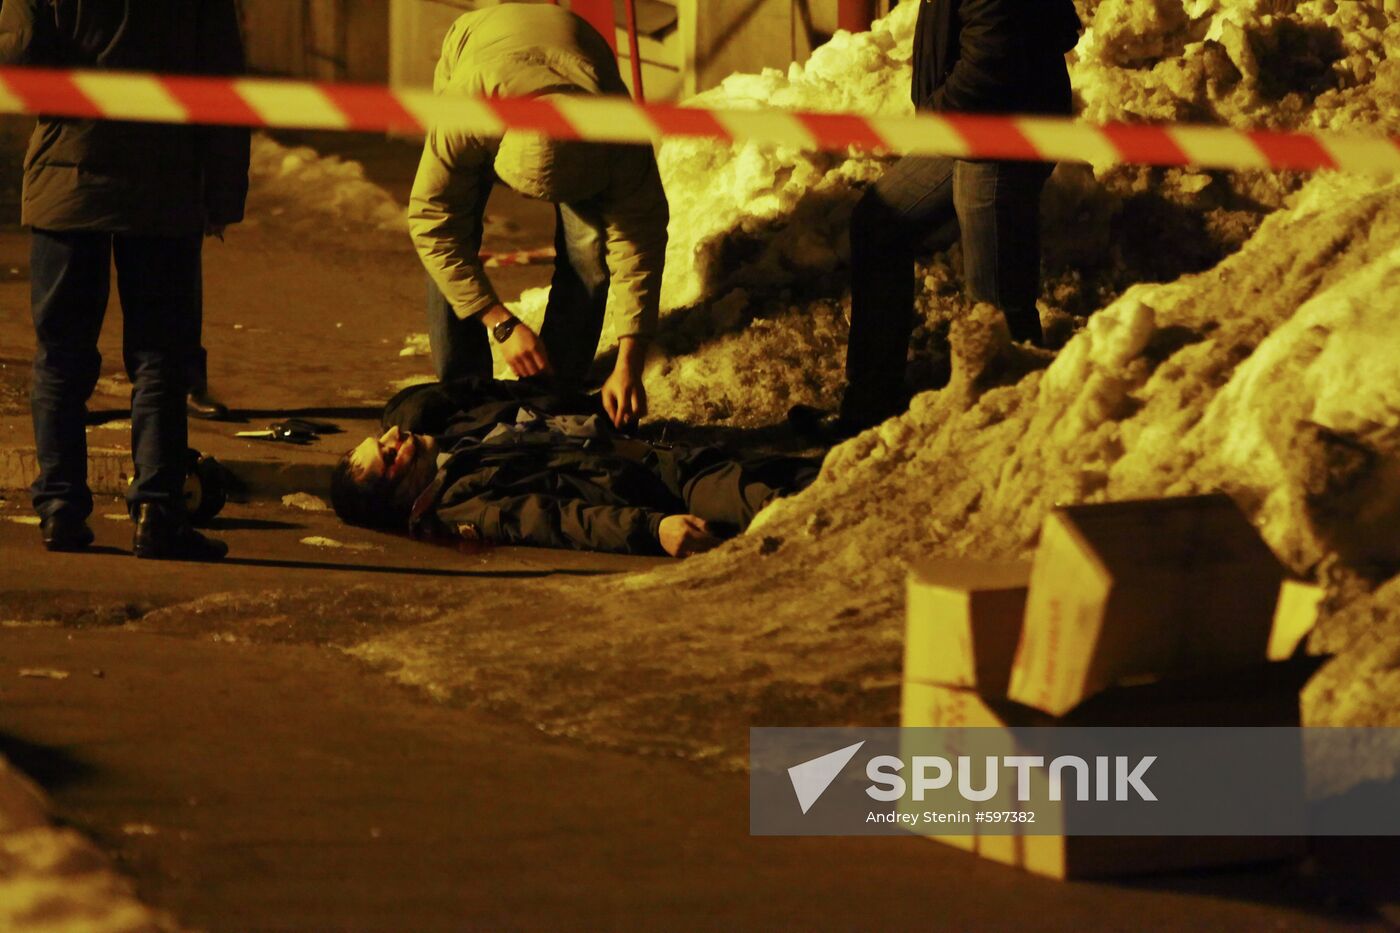 Police officer gunned down, another wounded in west Moscow